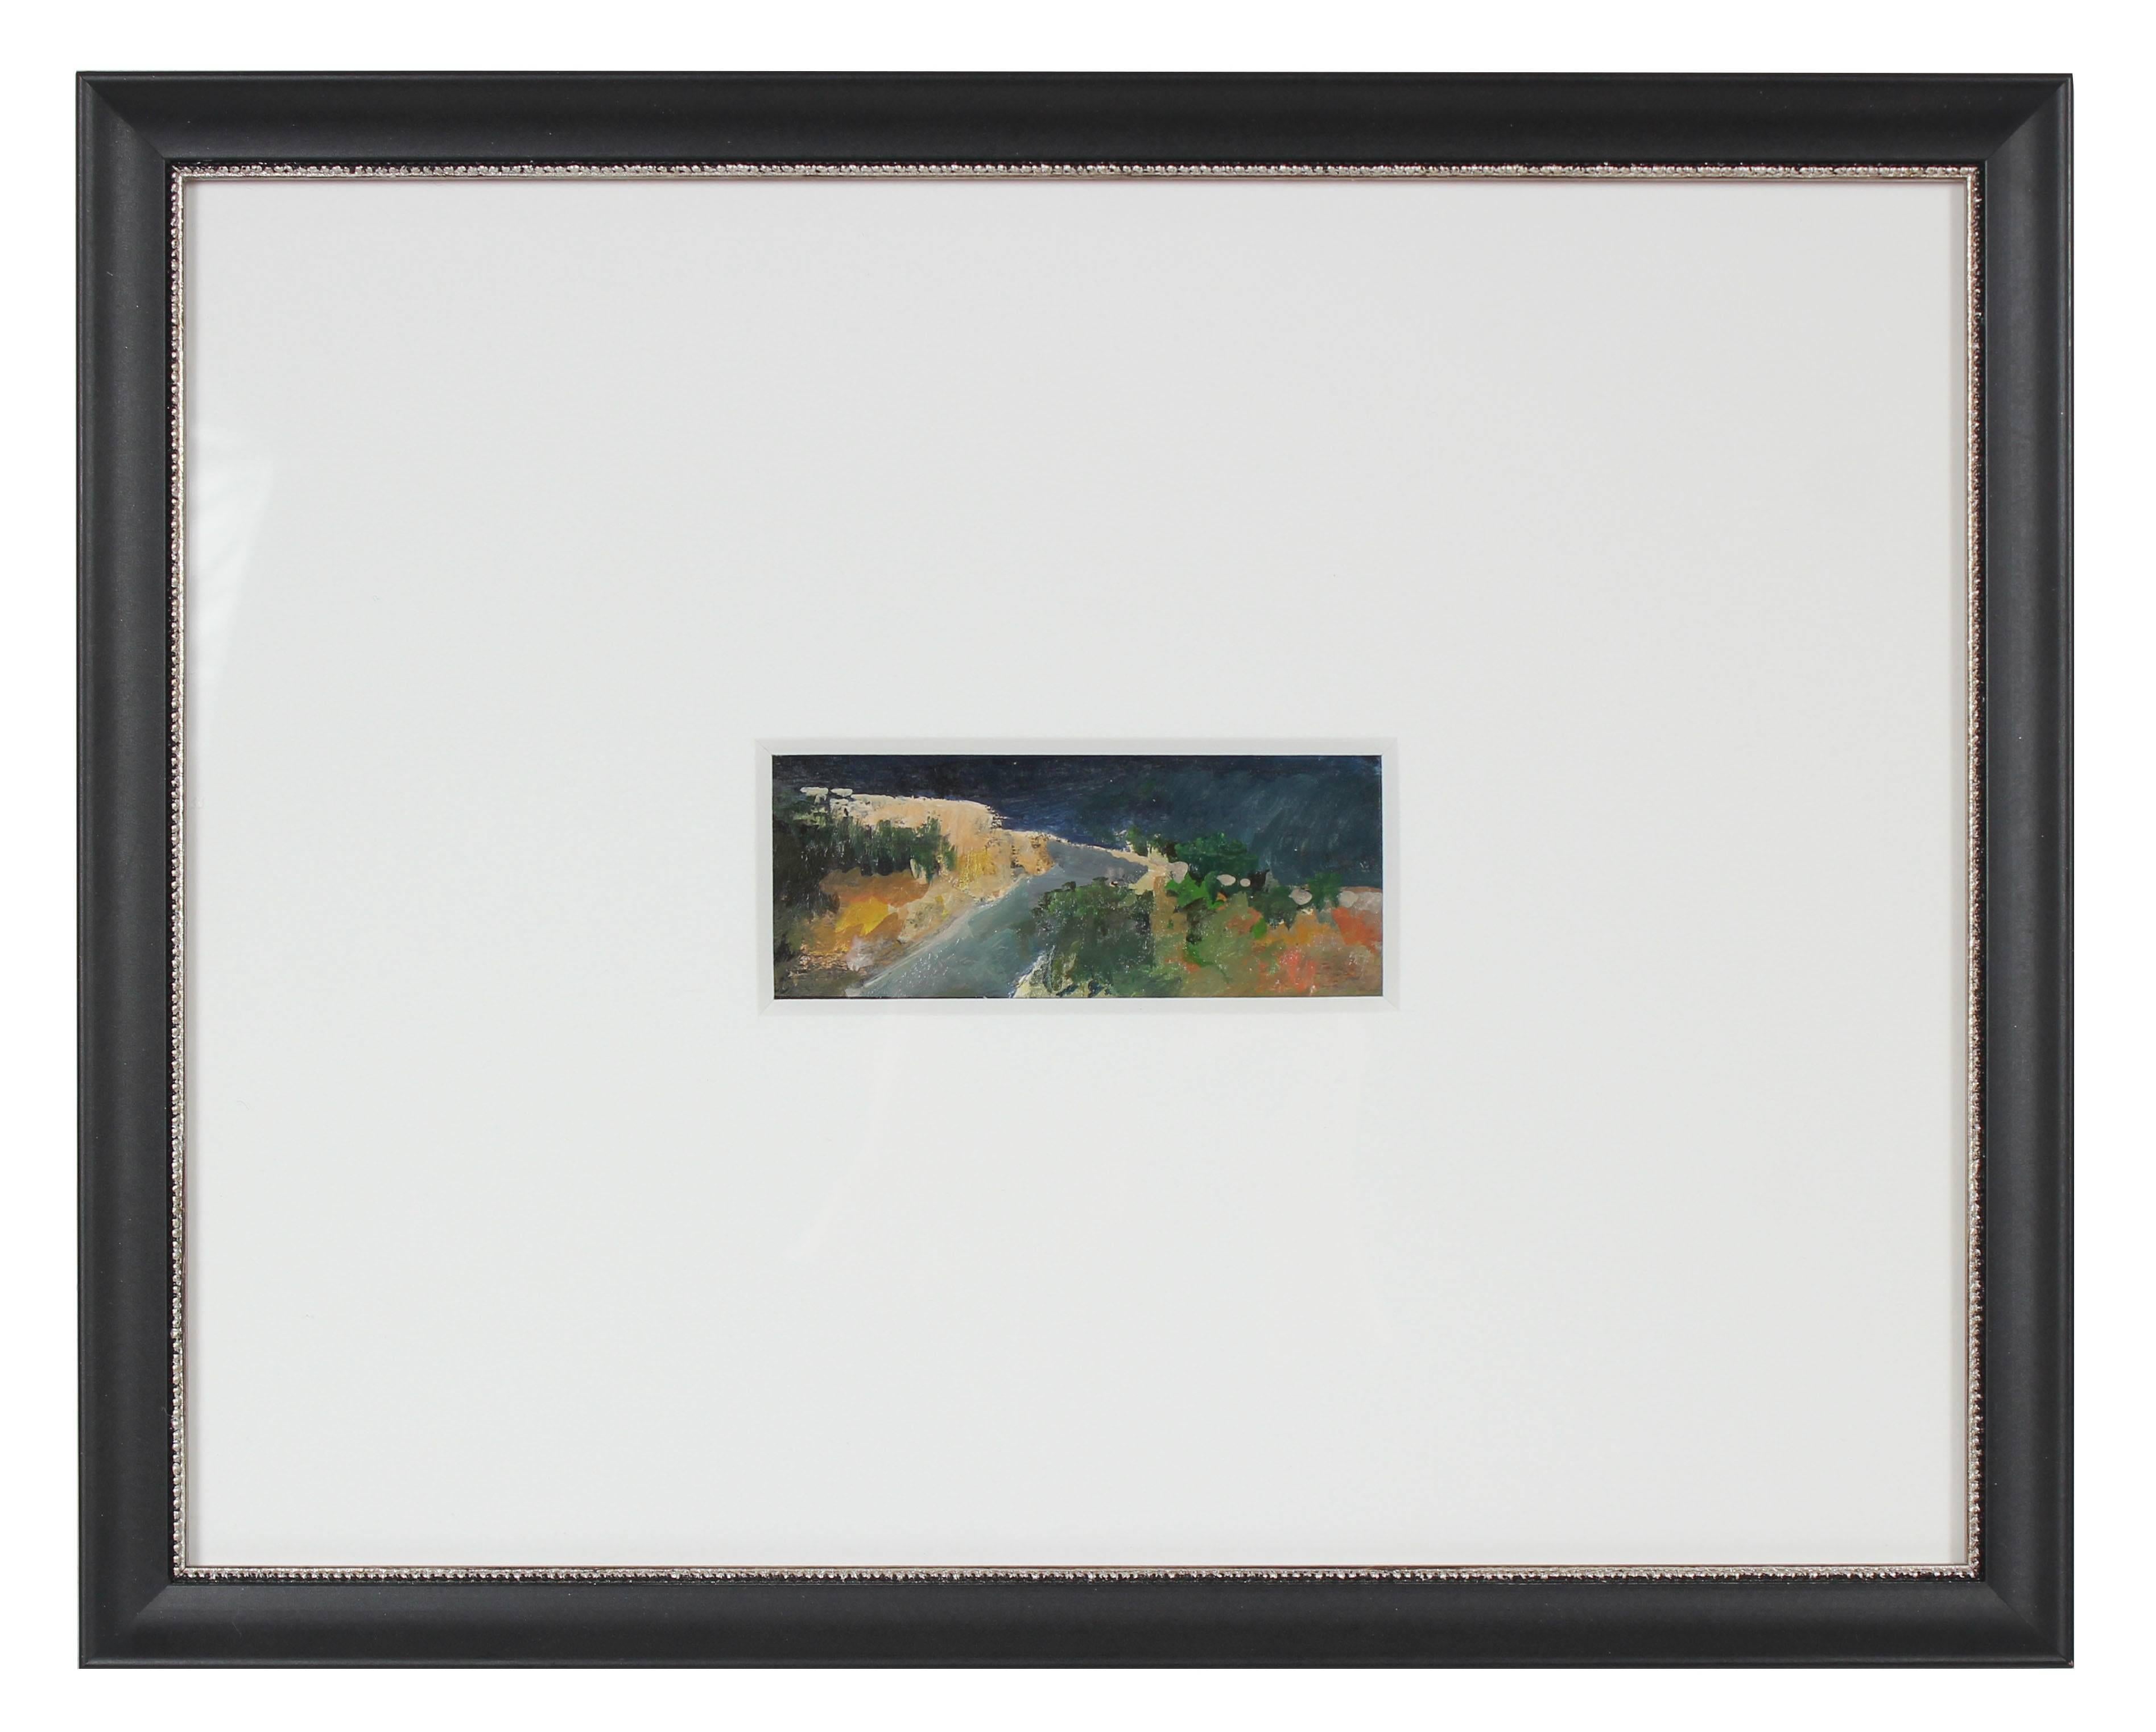 California Country Road, Petite Framed Oil on Paper Landscape - Painting by Schuyler Standish